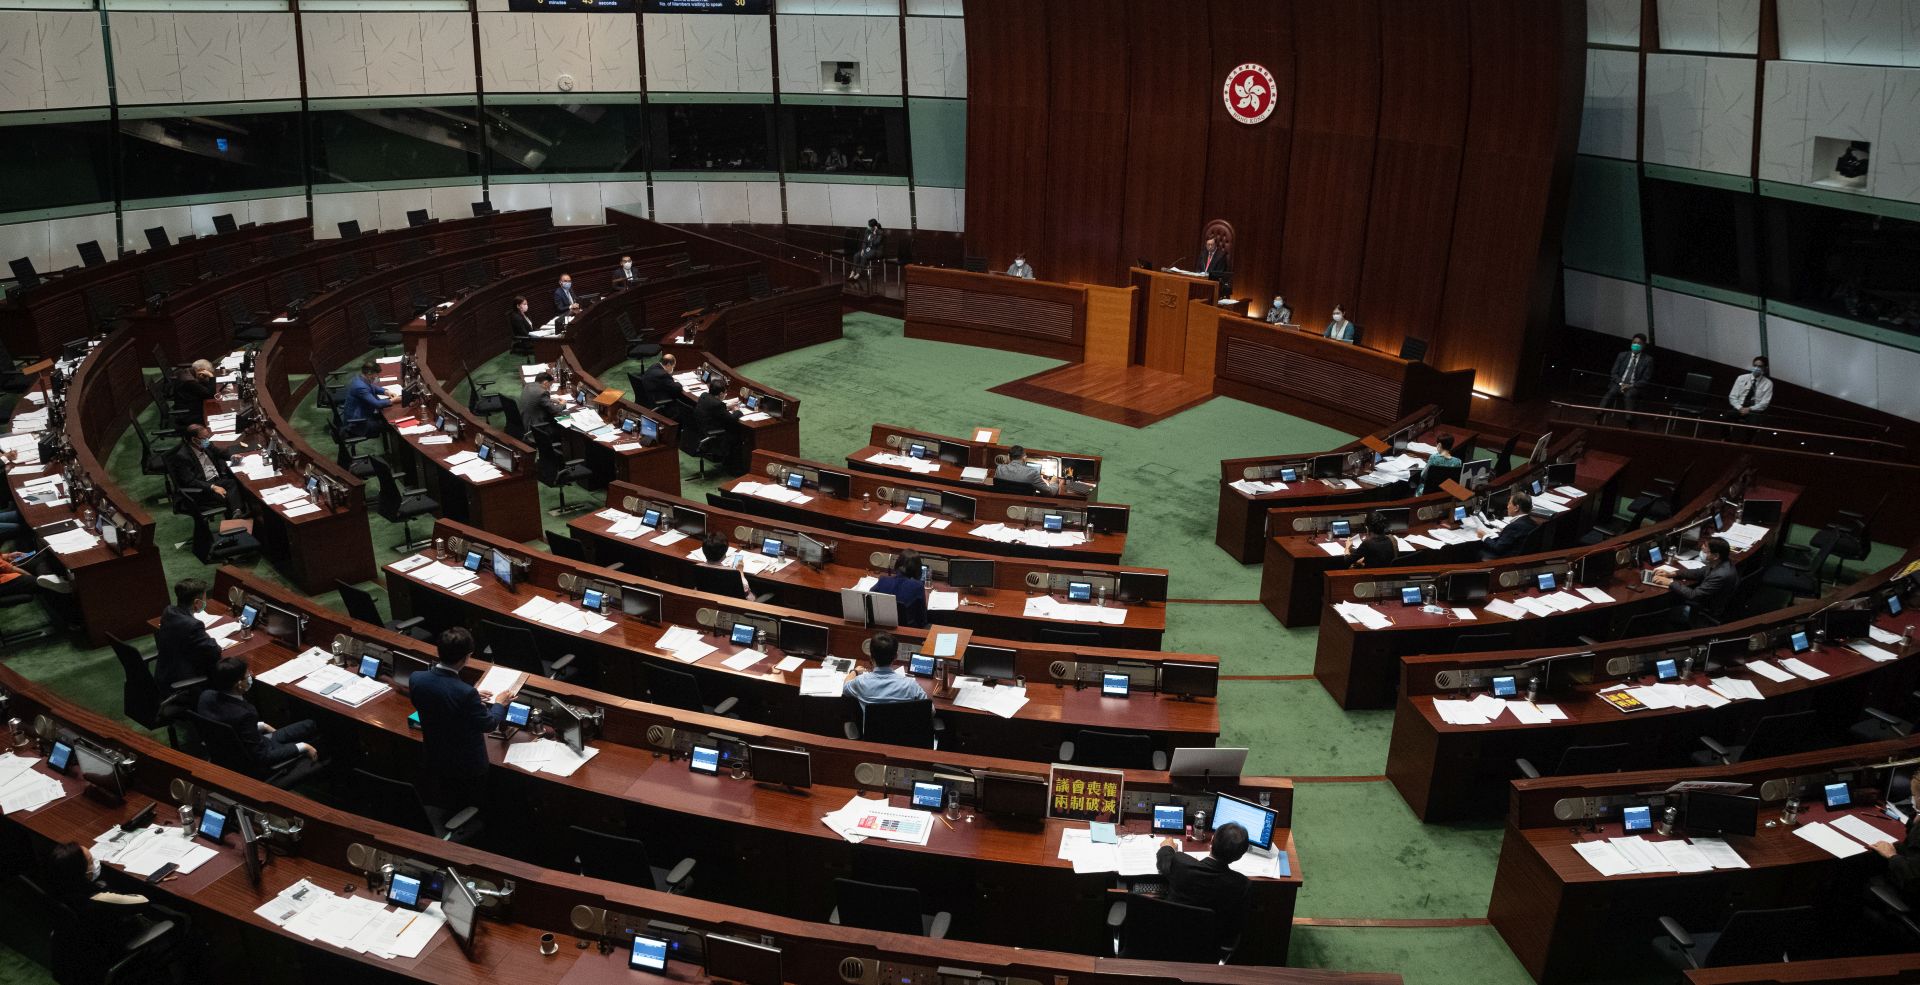 epa08446417 Lawmakers debate the second reading of the National Anthem Bill in the Legislative Council of Hong Kong, China, 27 May 2020. Under the bill, anyone convicted of misusing or insulting the 'March of the Volunteers' (the national anthem of the People's Republic of China) could face a fine of up to 50,000 Hong Kong dollars (6,449 US dollars) and three years in jail. The bill is expected to be put to a vote on 04 June.  EPA/JEROME FAVRE